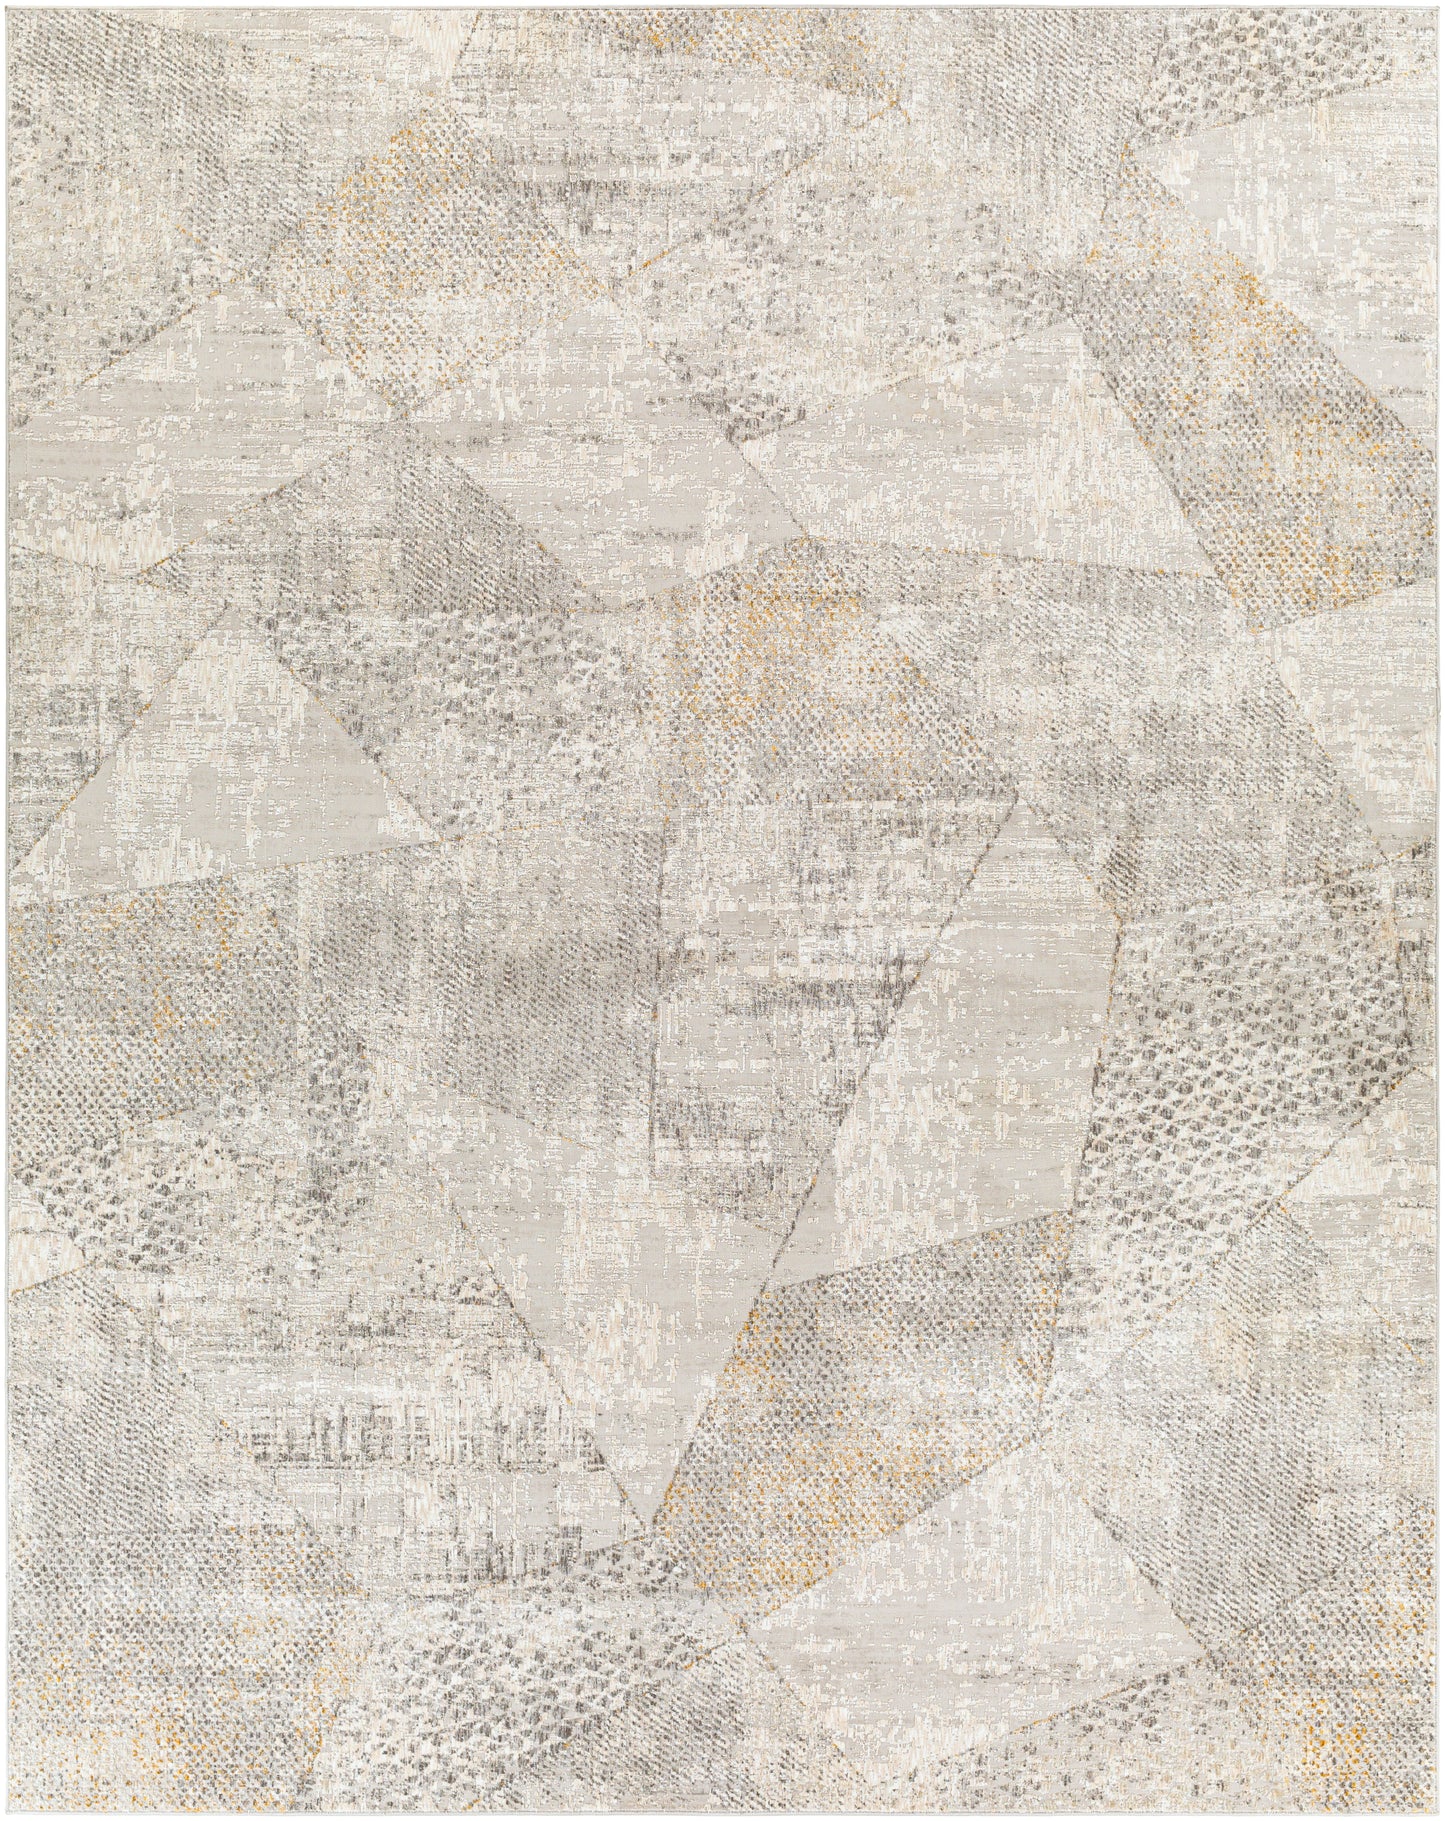 Carmel 26287 Machine Woven Synthetic Blend Indoor Area Rug by Surya Rugs